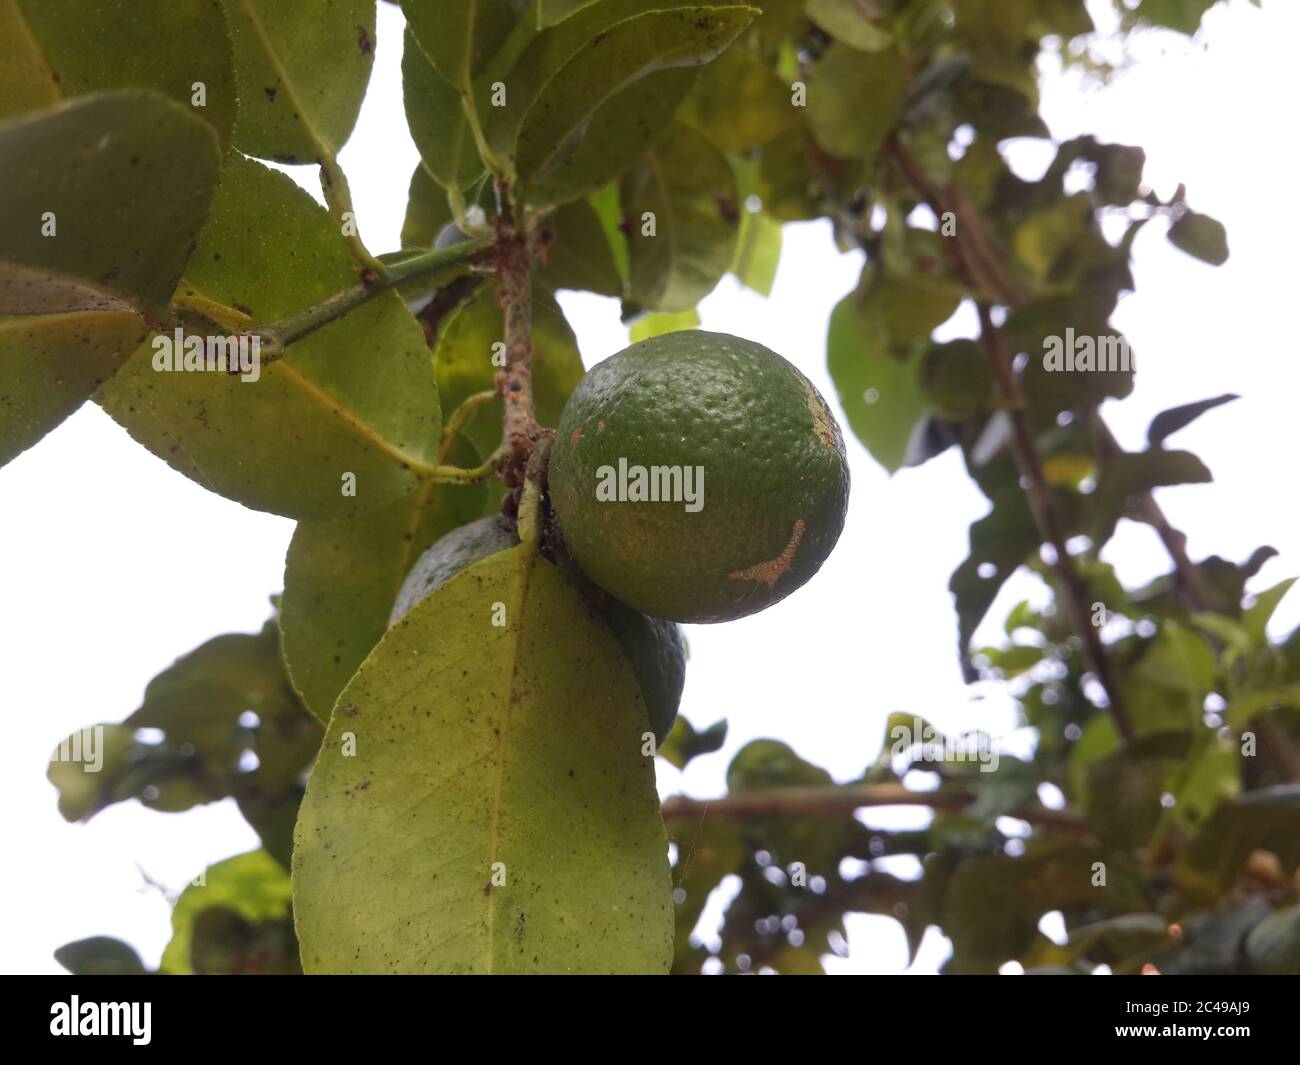 Closeup shot of a Philippine lime with blurred leaves background Stock Photo